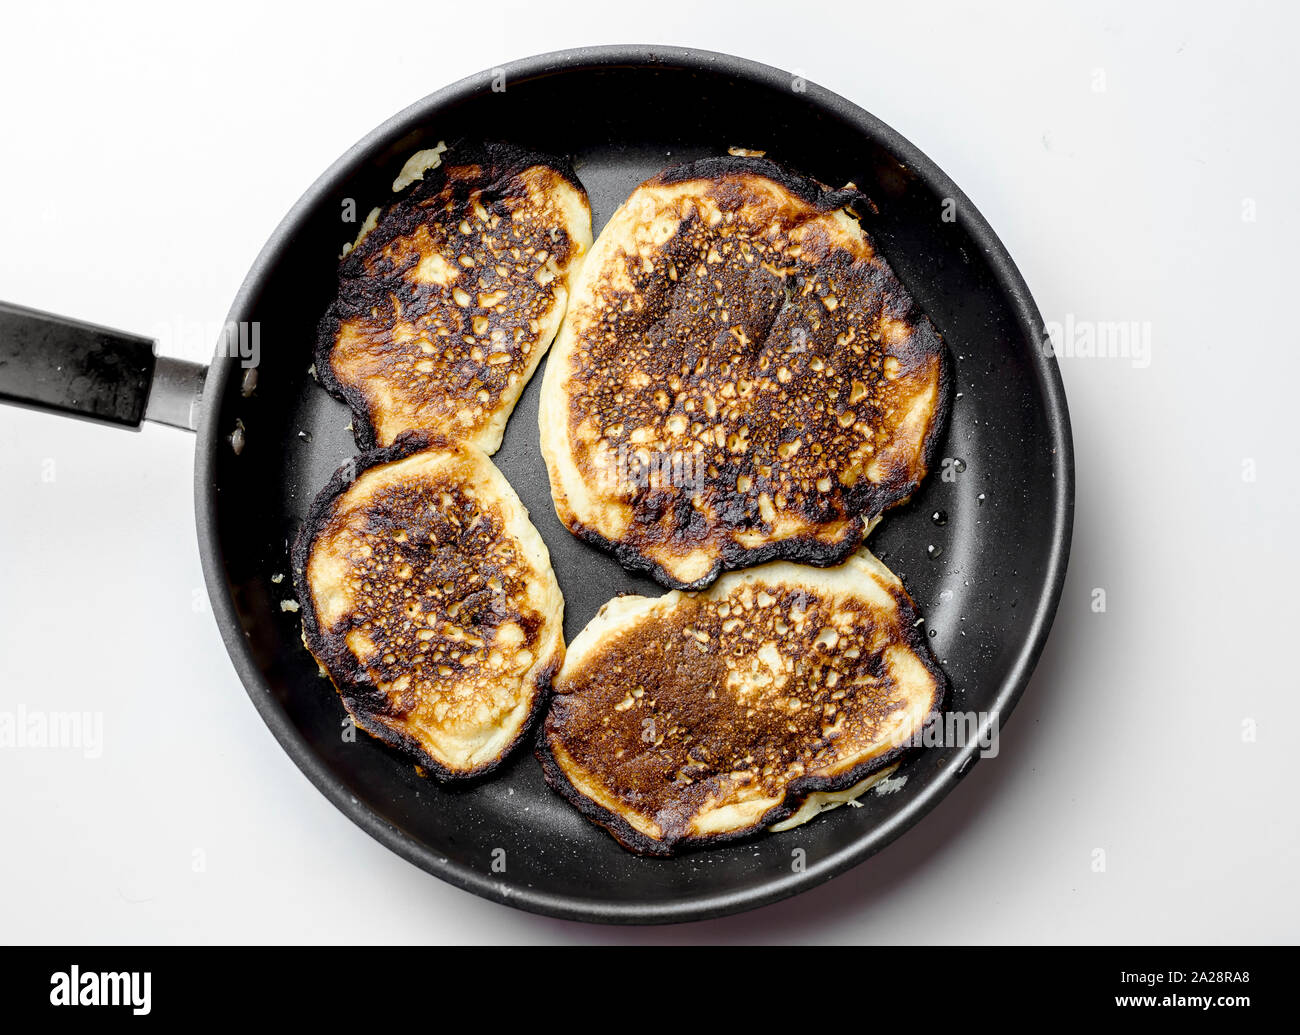 Cooking failed, burnt pancakes on a black pan, one pancake on a spatula. Stock Photo